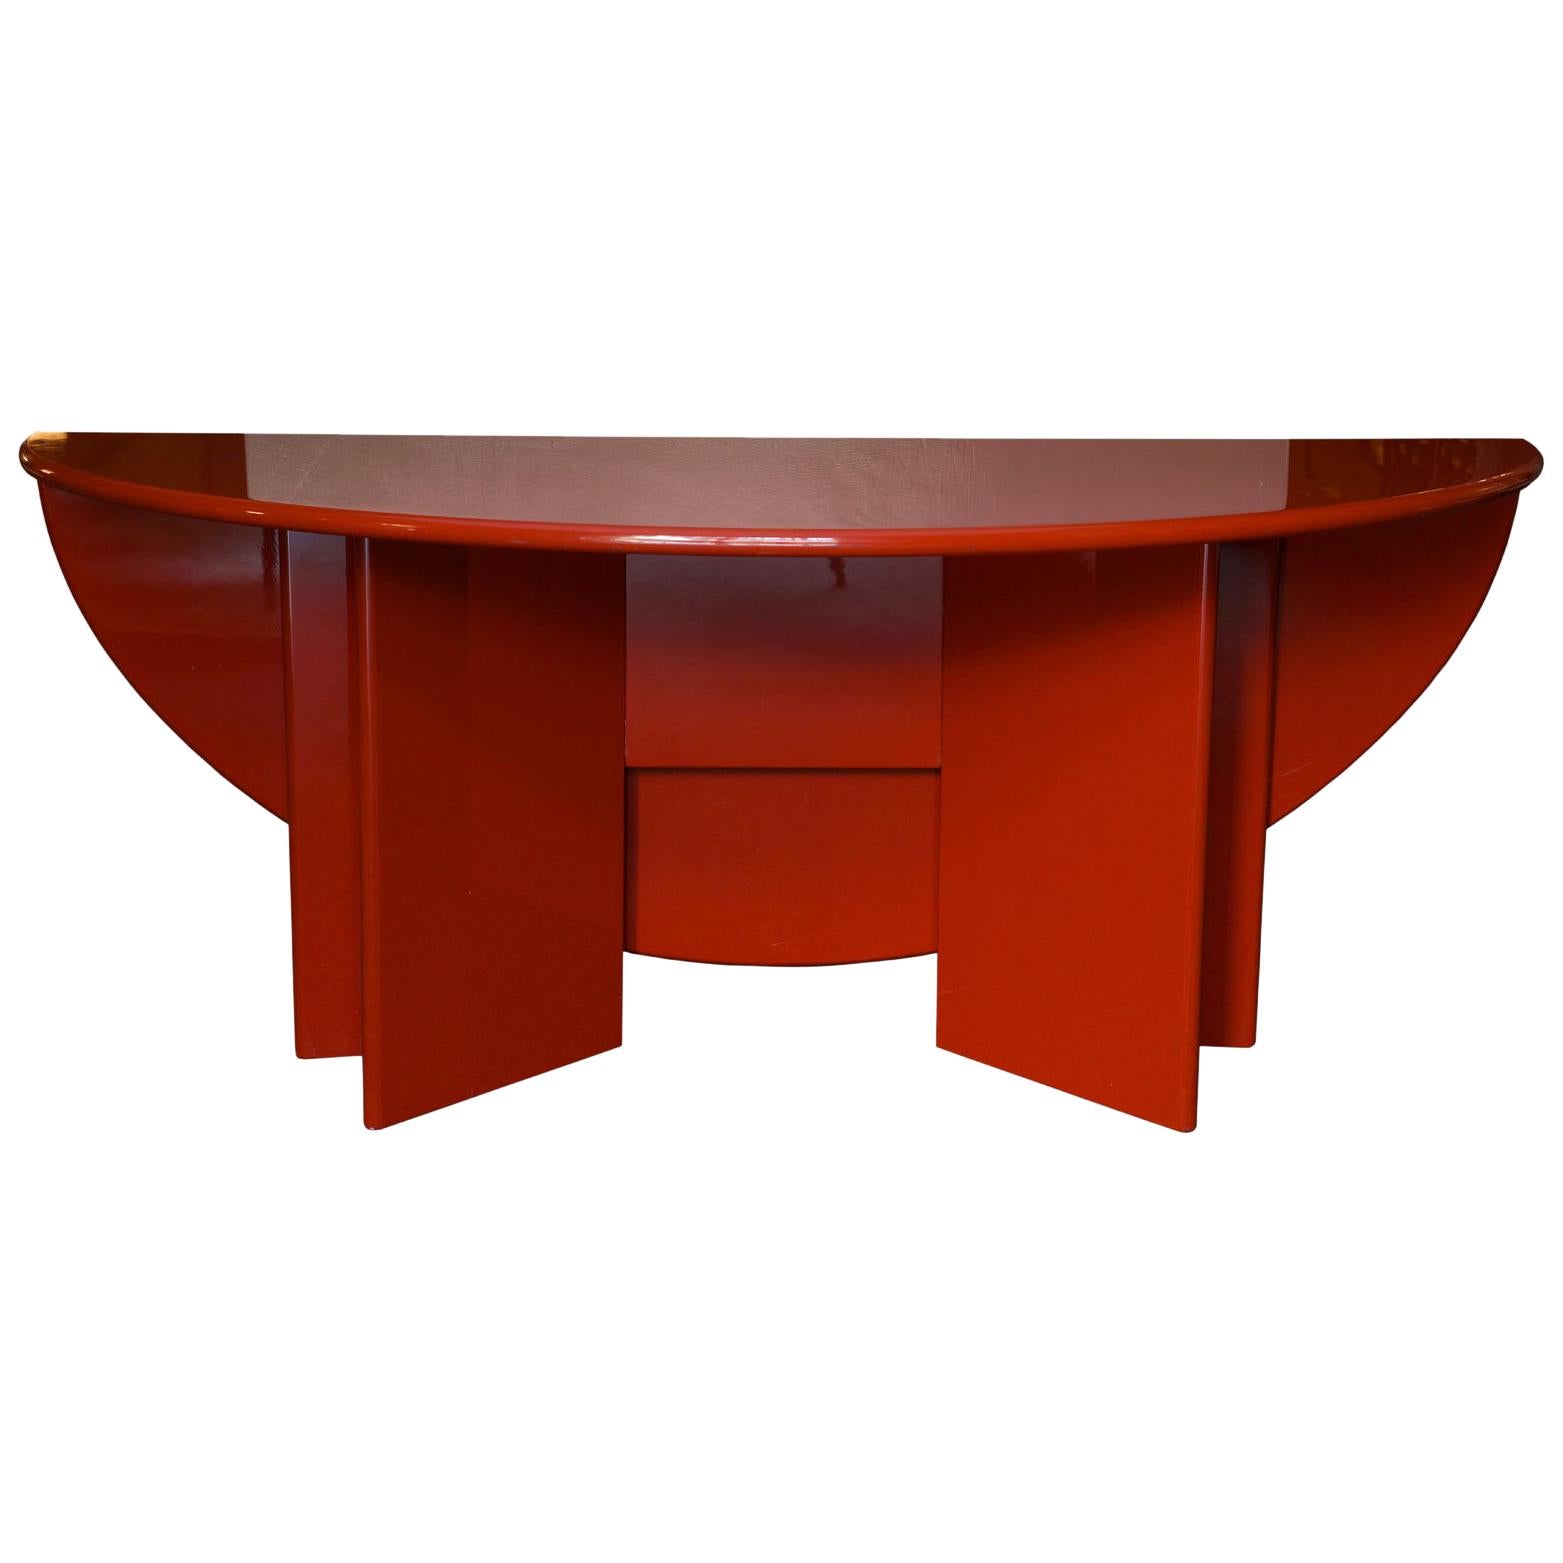 Antella, Oval Console Table by K. Takahama for Simon, Red Lacquer, Italy, 1978